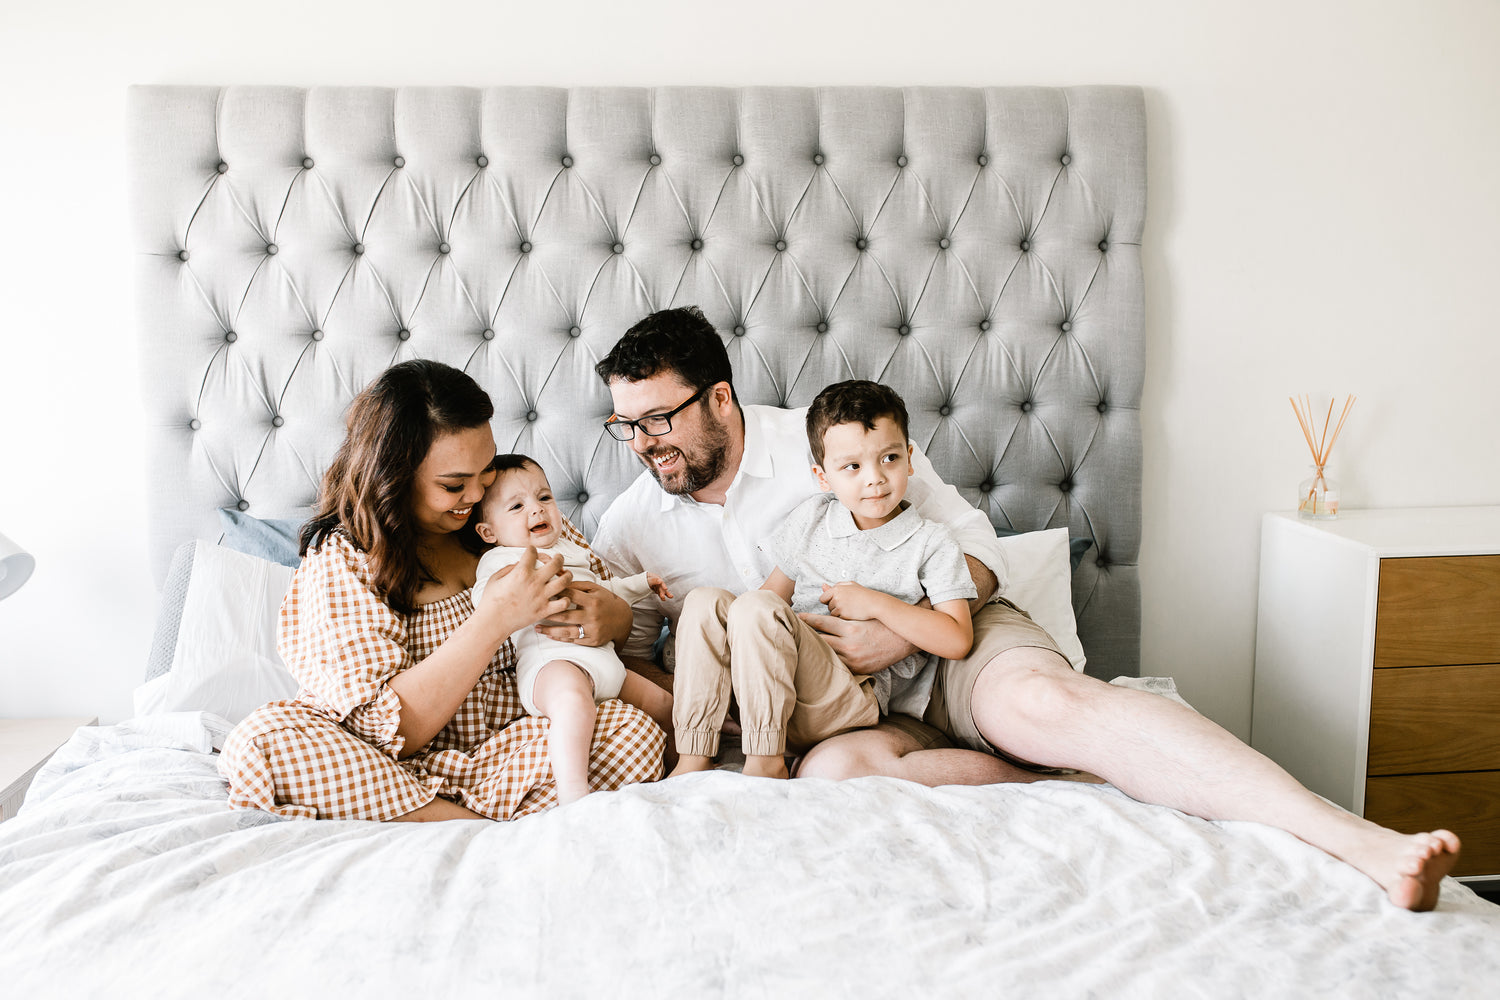 <p>Pullen & Co founder Avi is a home organiser, decor fanatic, loving wife, busy mum of two, and perfectly imperfect, neat freak! Browse our collection of the very best home storage ideas and minimalist home decor online today, all personally designed for your inner calm.</p>